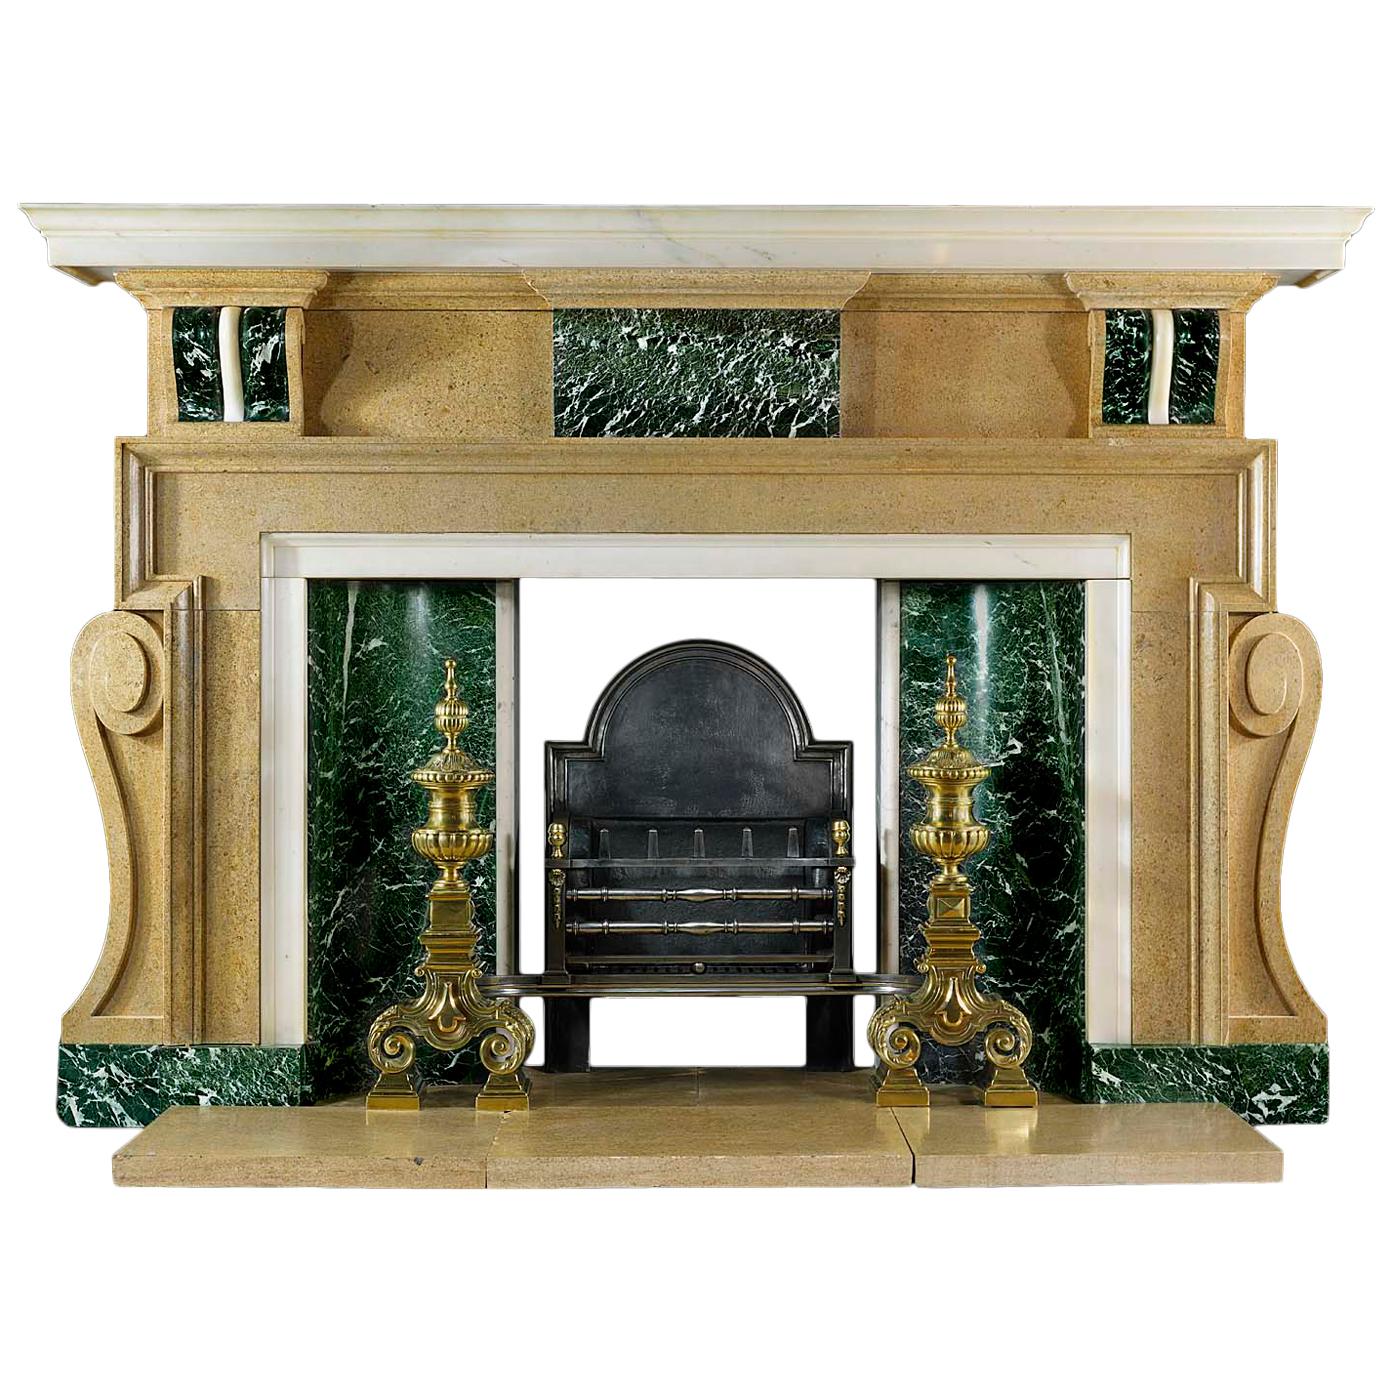 20th Century Fossil Stone and Marble Chimneypiece in the Palladian Manner For Sale